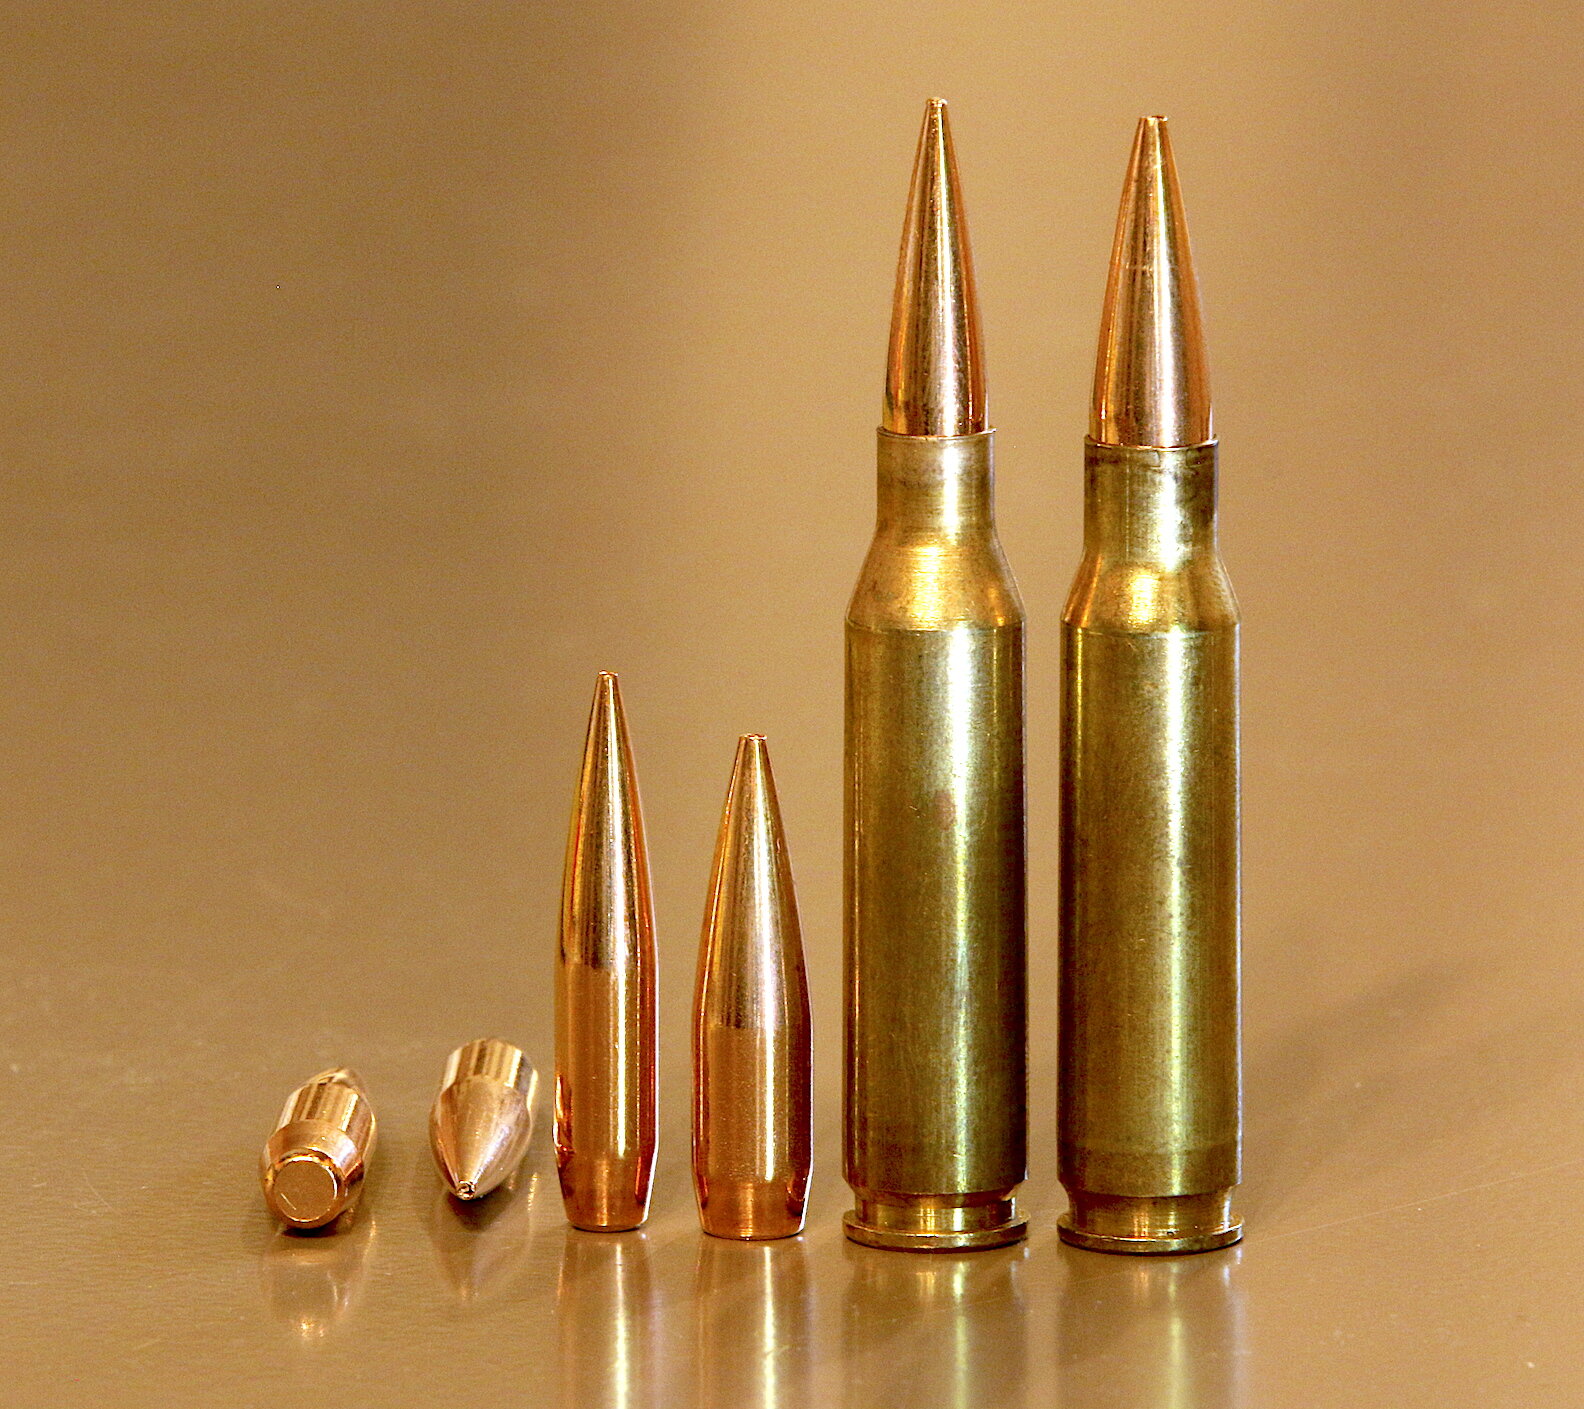 The 6.5 Creedmoor: How it Compares to Other Rifle Cartridges